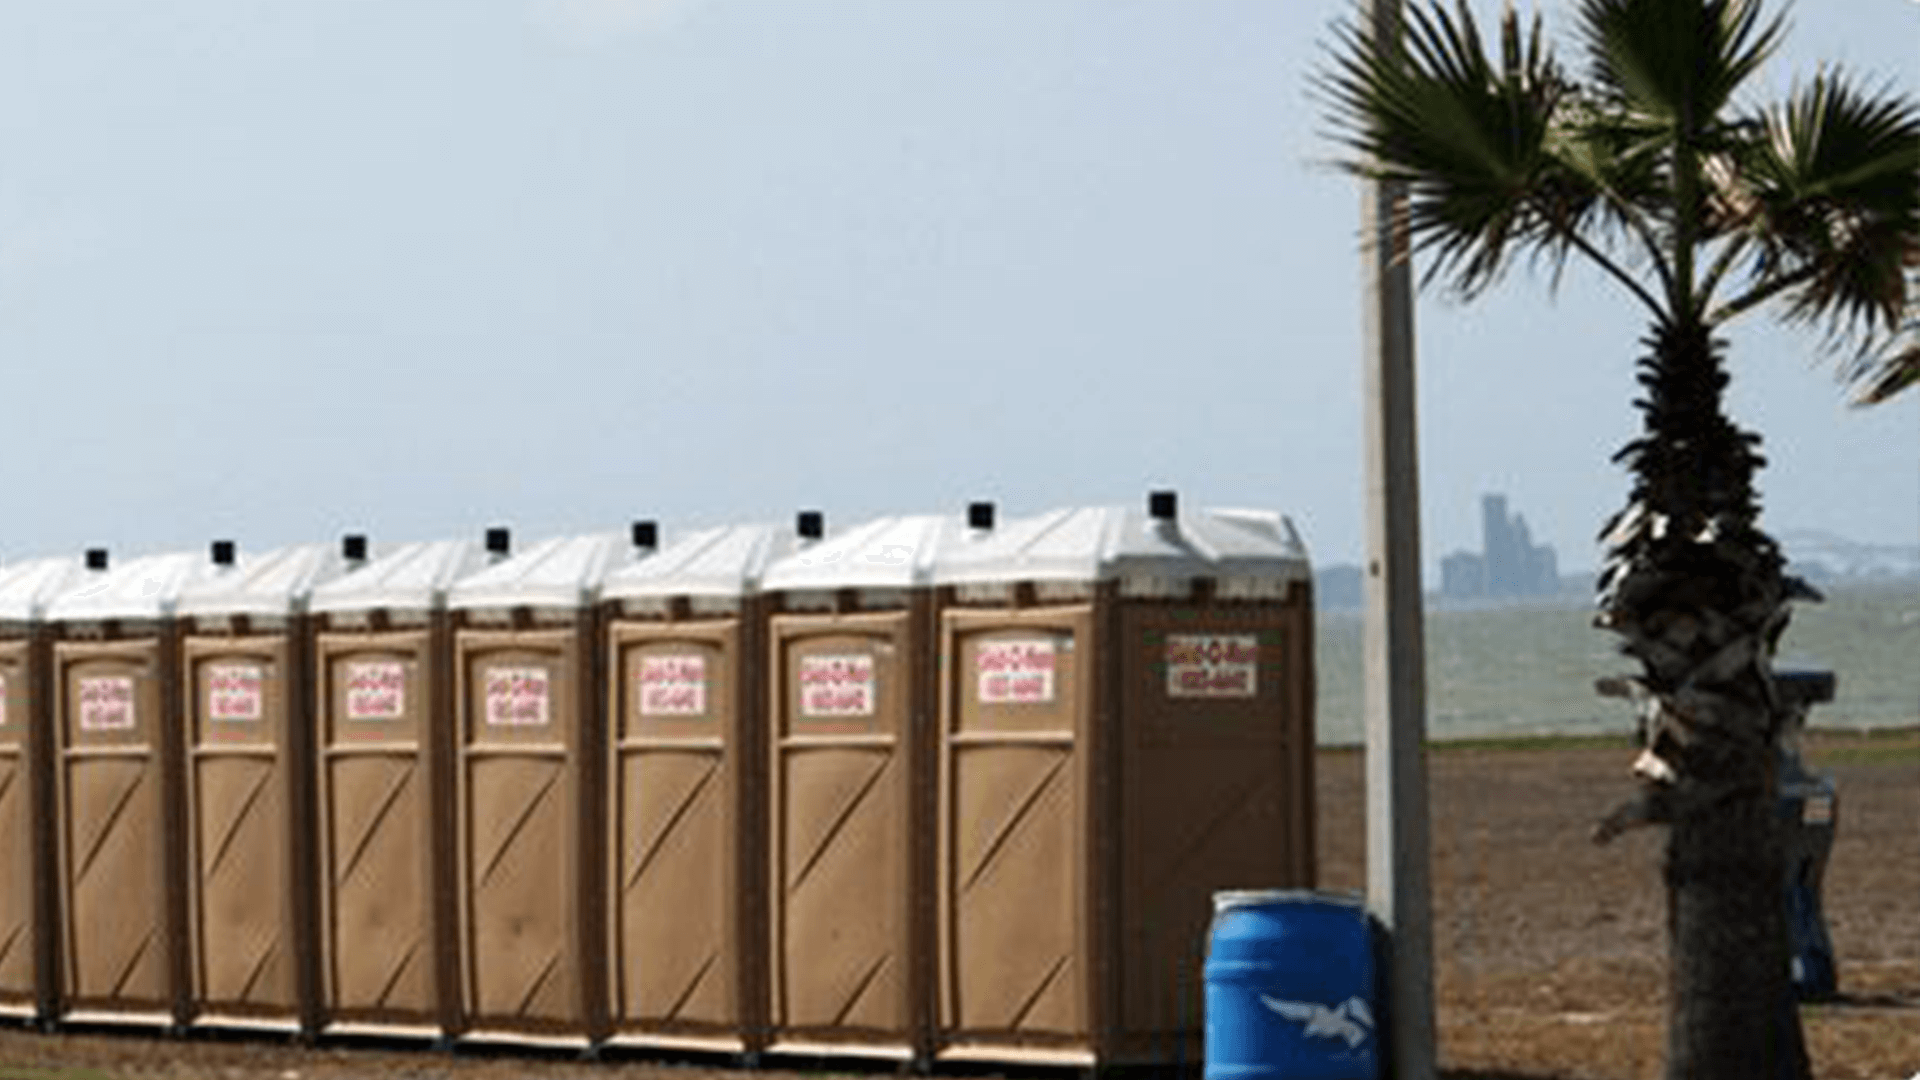 Skid o Kan portable toilets in South Texas by a palm tree.